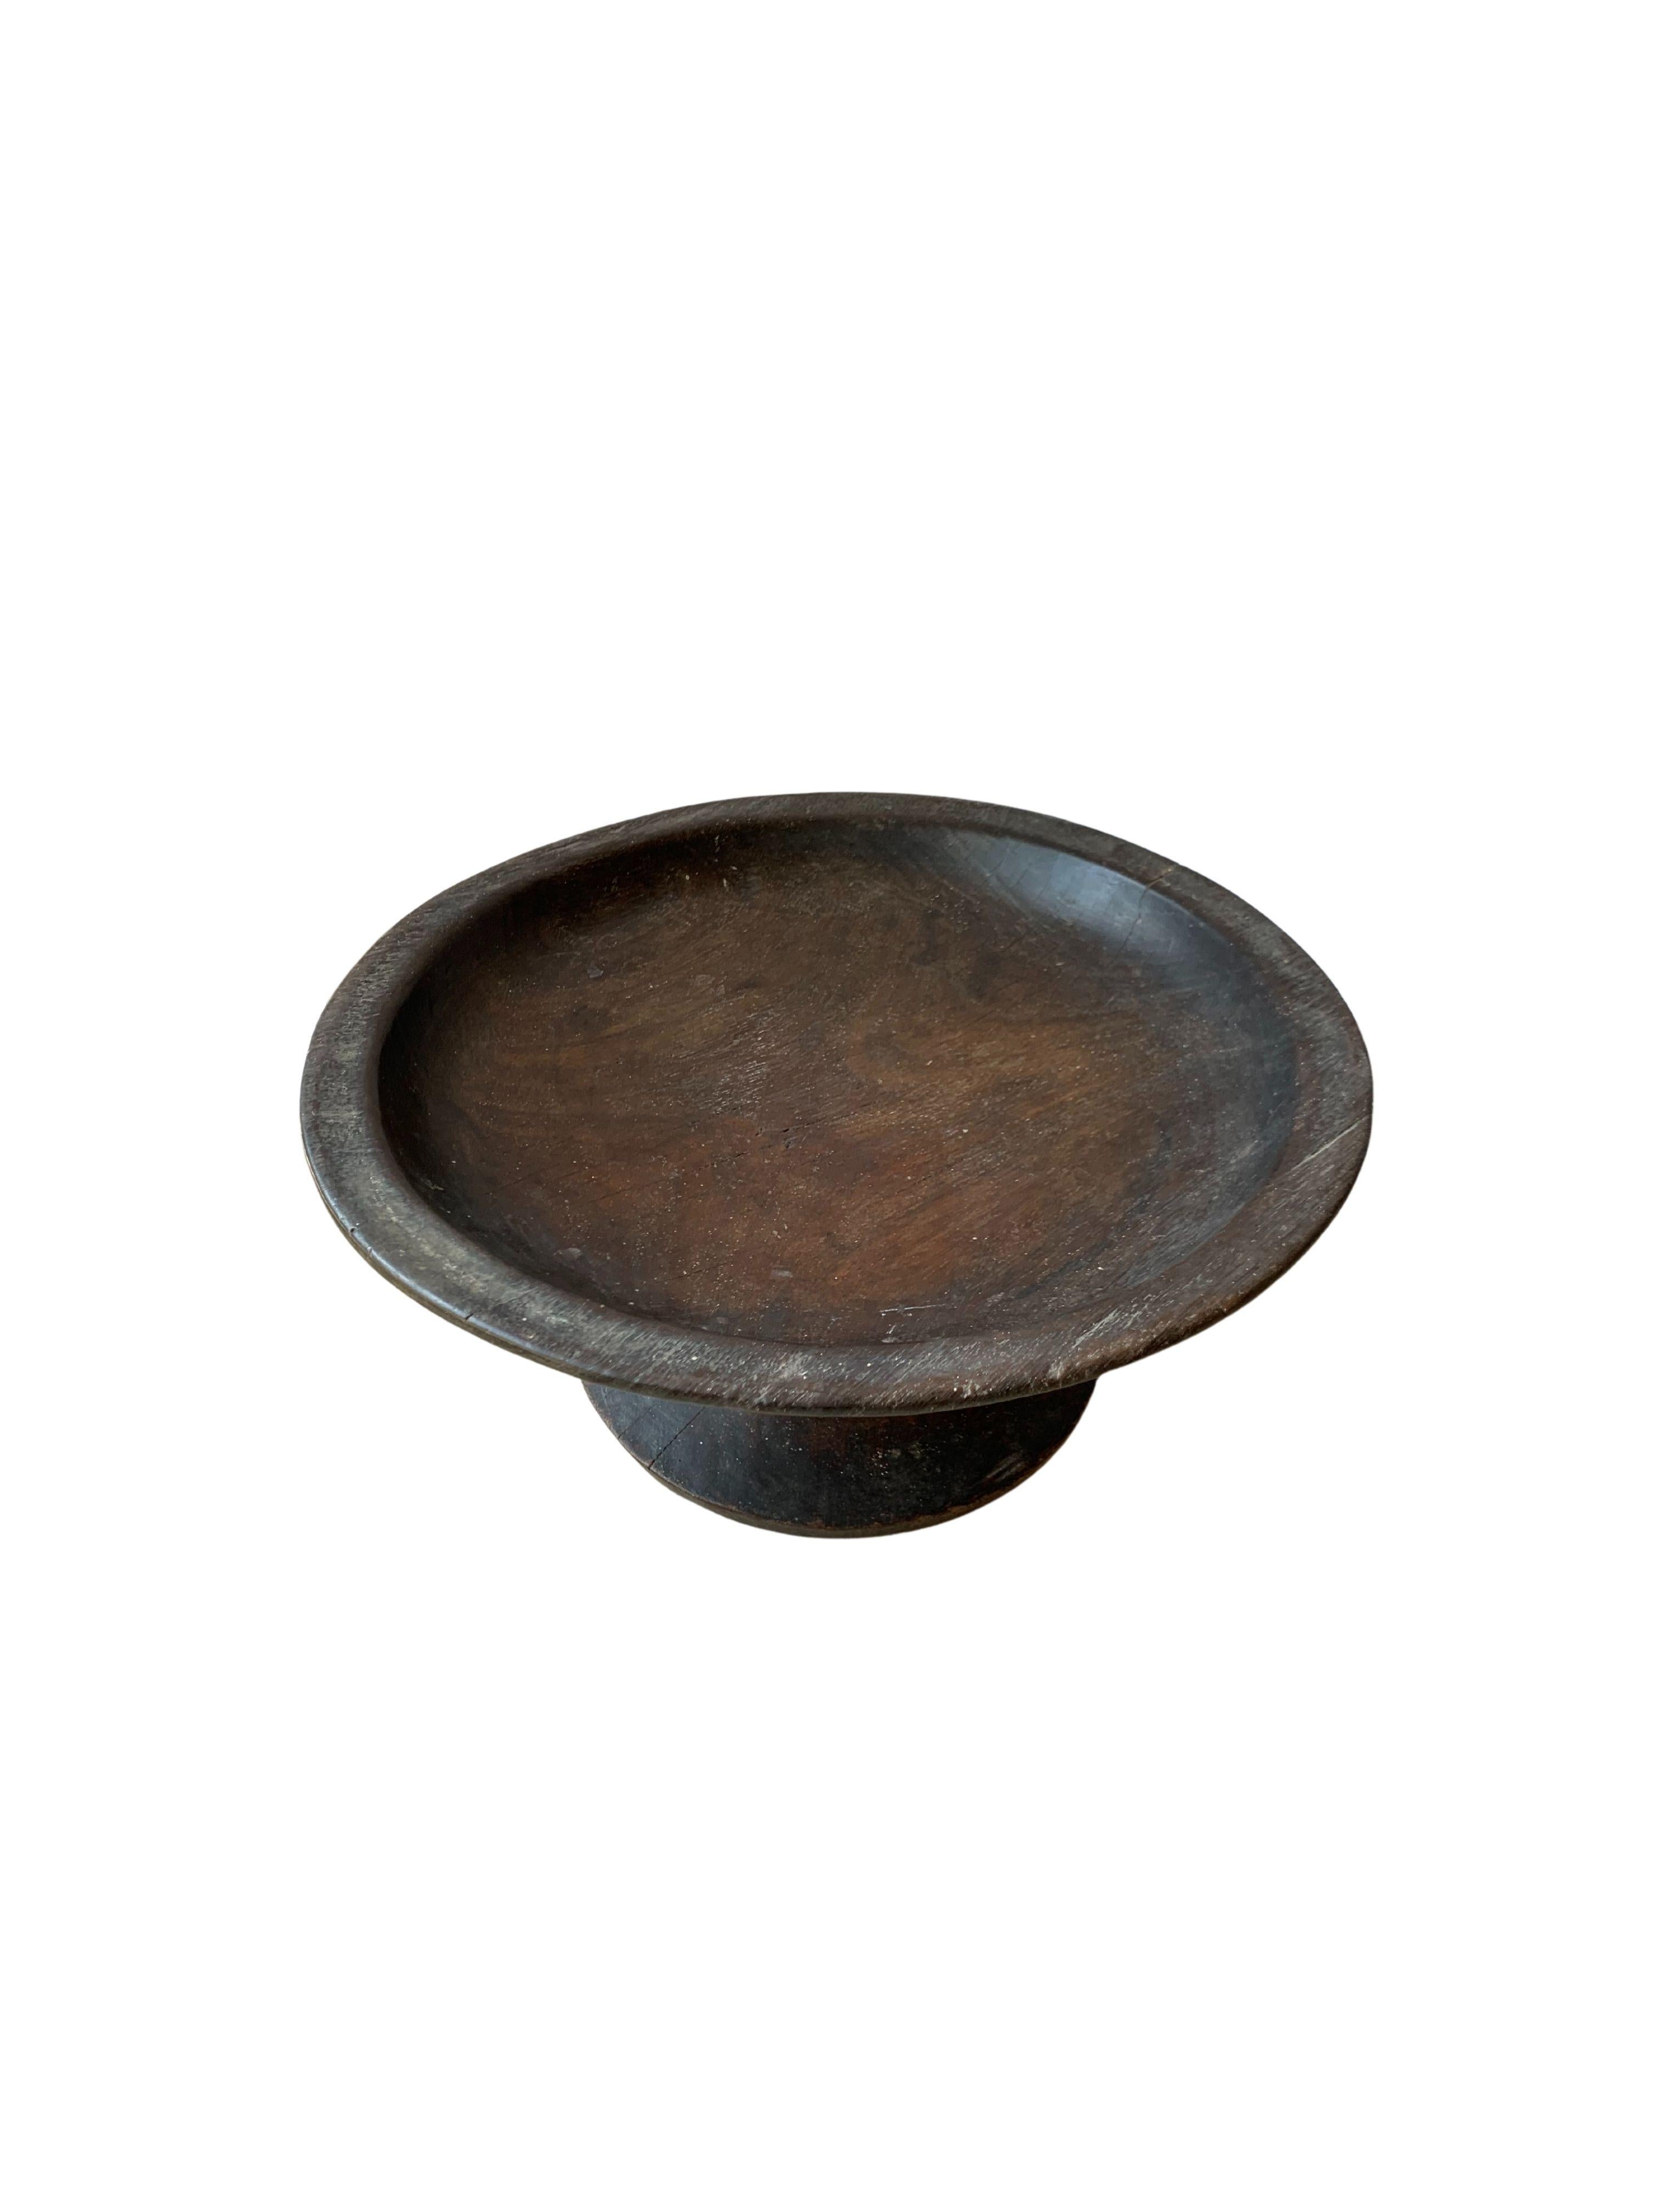 Batak tribe ceremonial bowl from jackfruit wood, early 20th century. The Batak Tribes are ethnic groups predominantly found in North Sumatra, Indonesia. 

 